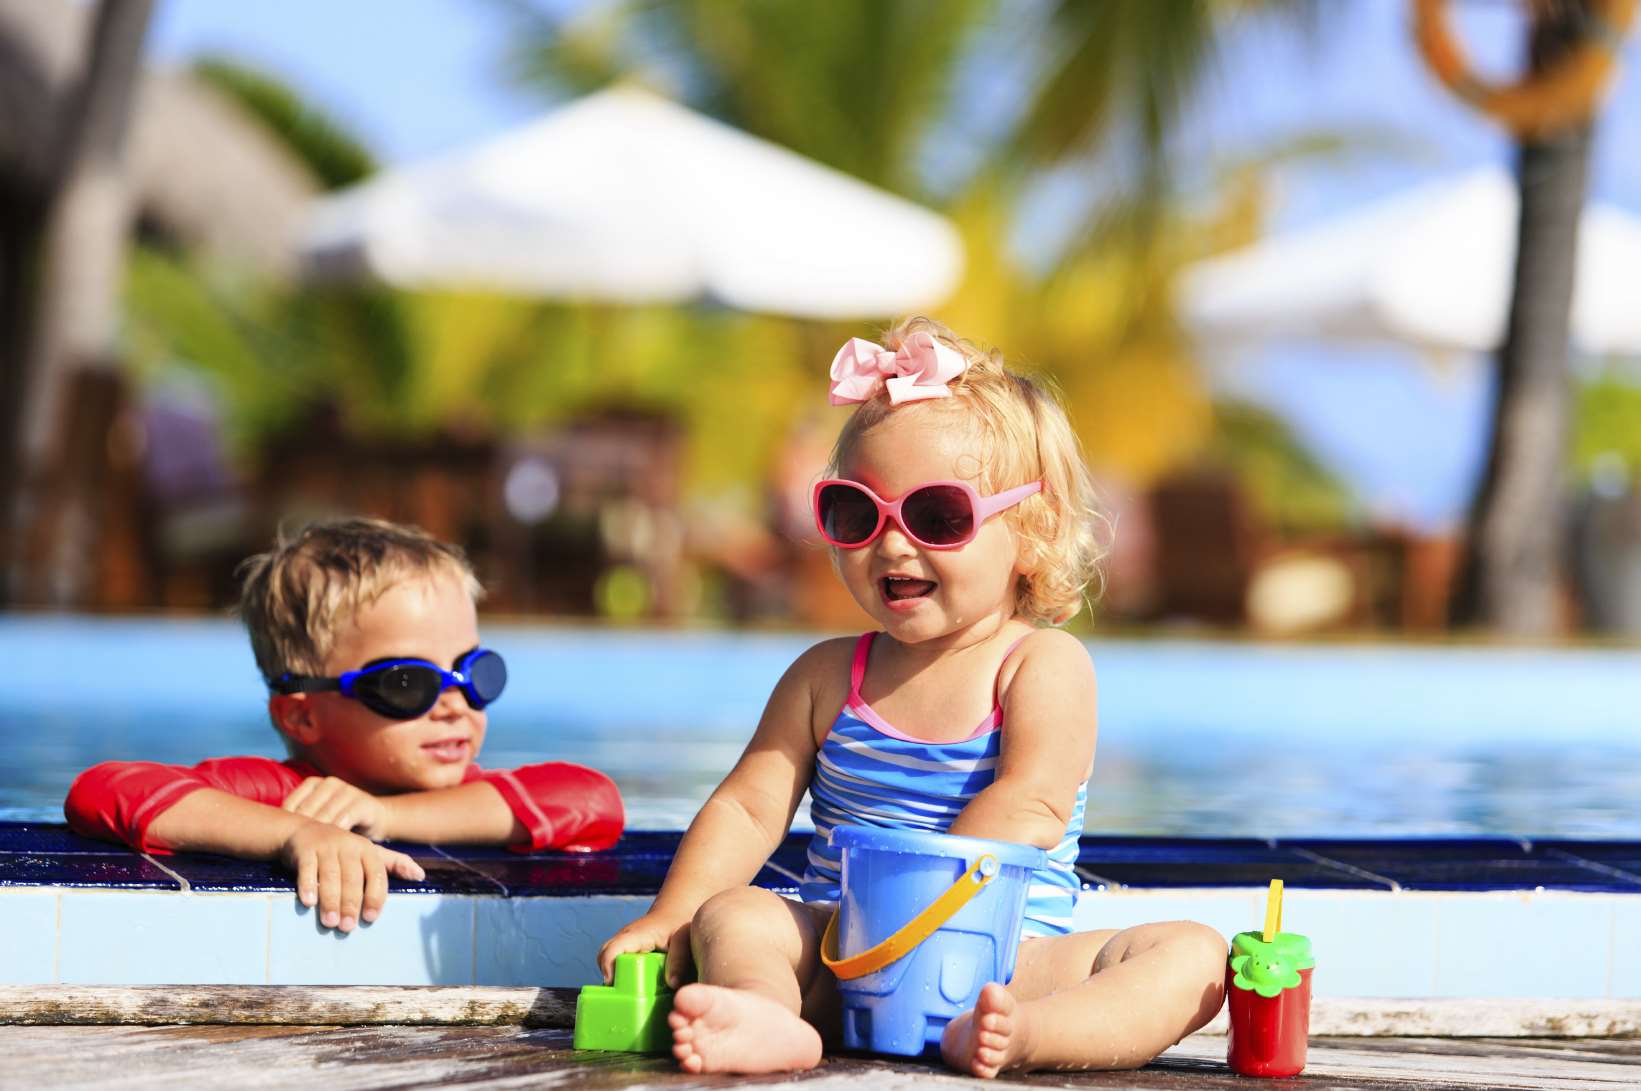 Sunglasses protect children's eyes against harmful rays from the sun